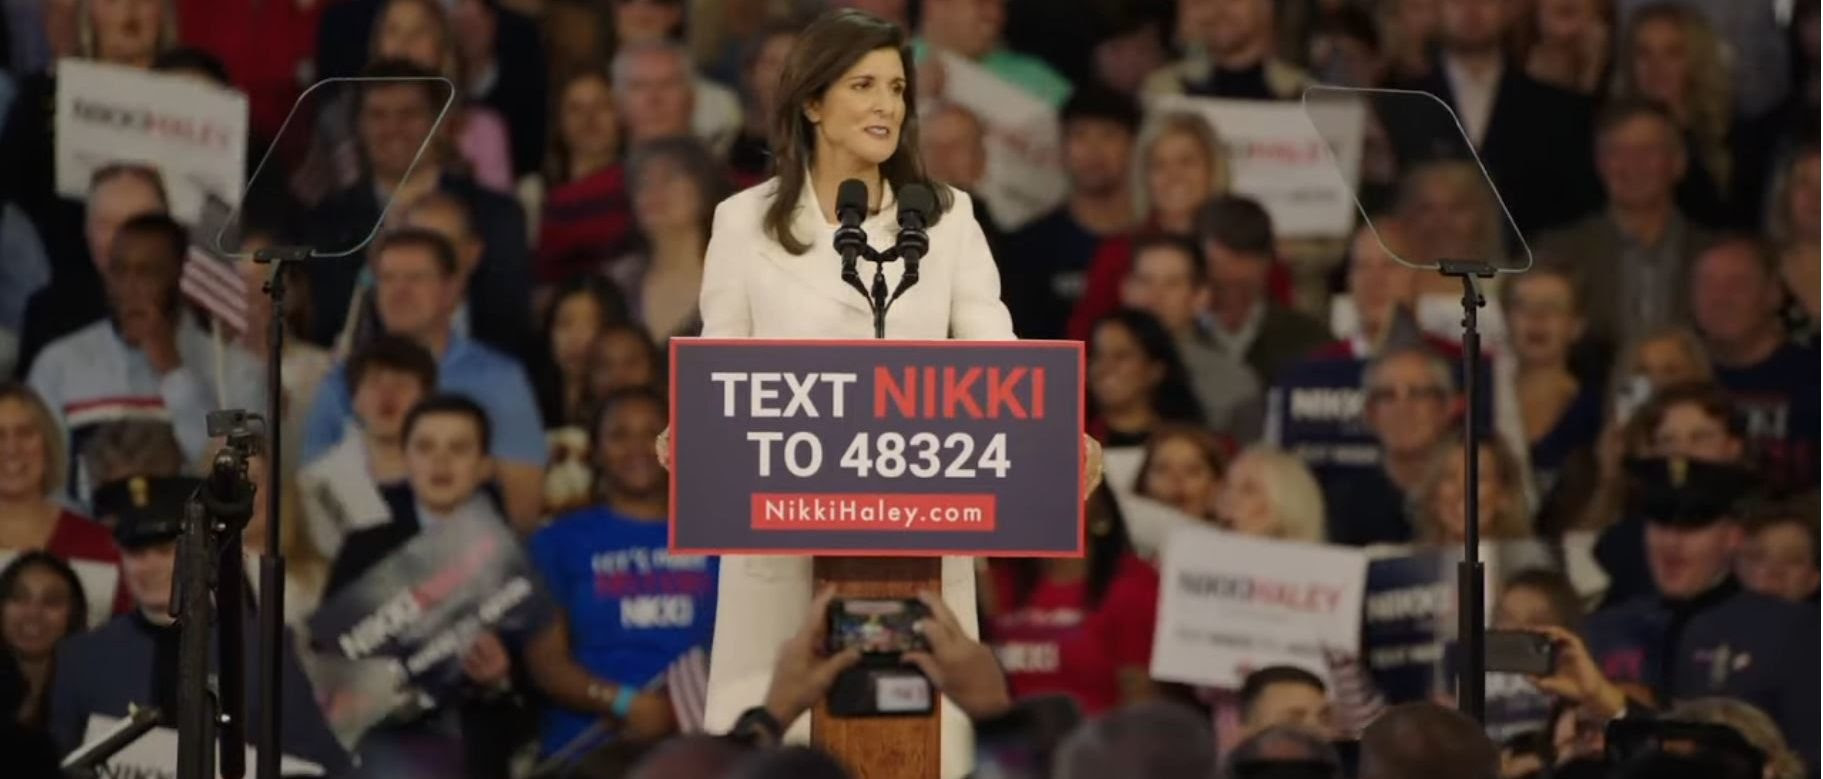 Nikki Haley Calls Out America ‘Spiraling Towards Socialism’ In Official 2024 Presidential Campaign Launch